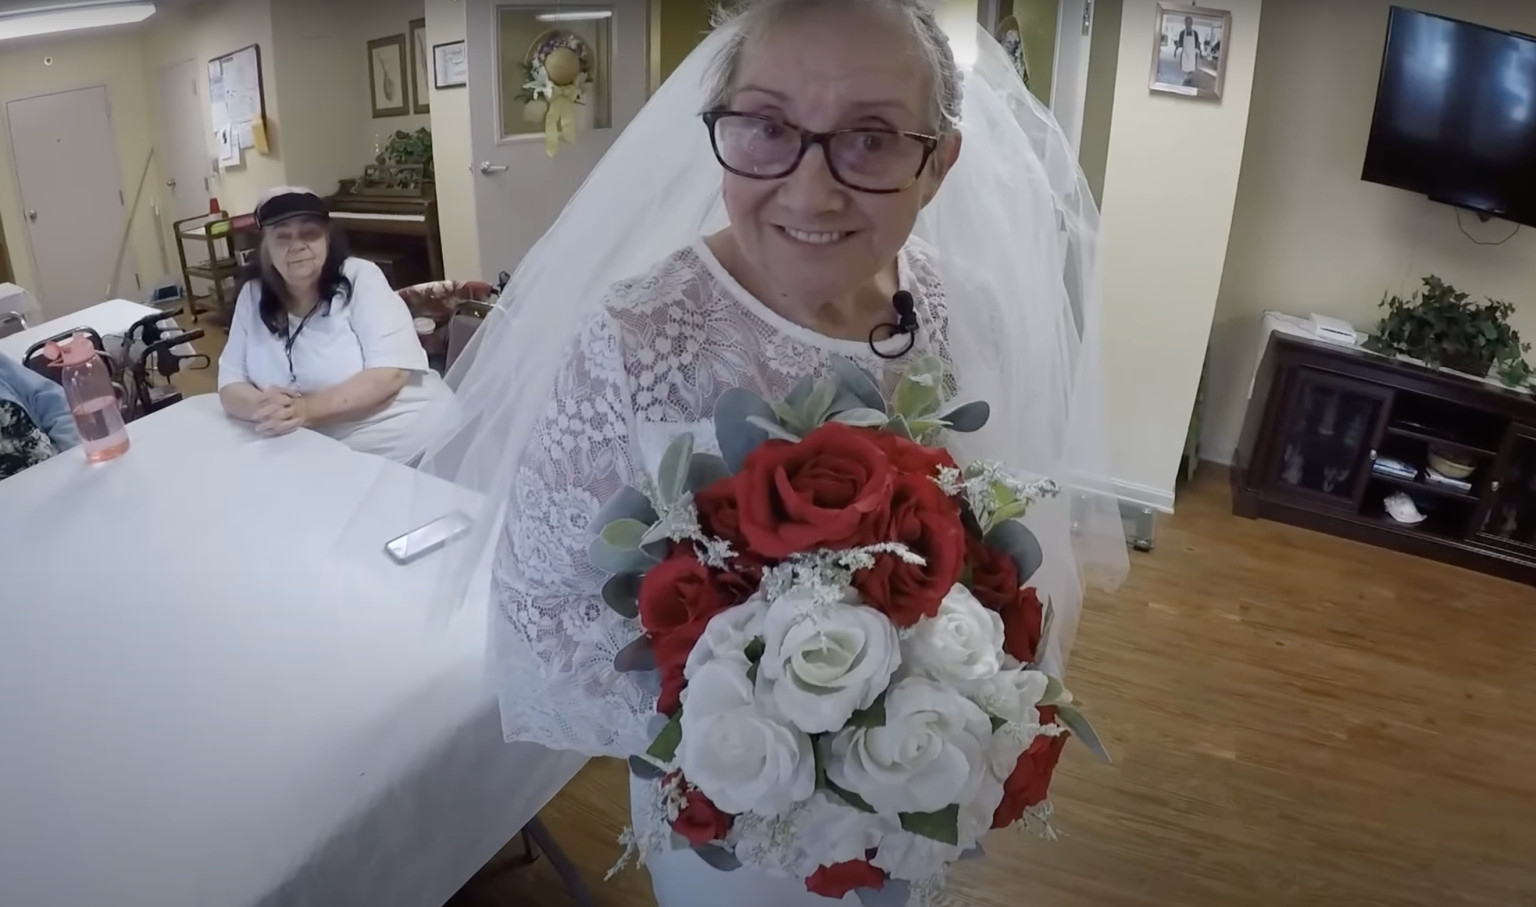 A 77-year-old woman married… herself – the resounding message she sends